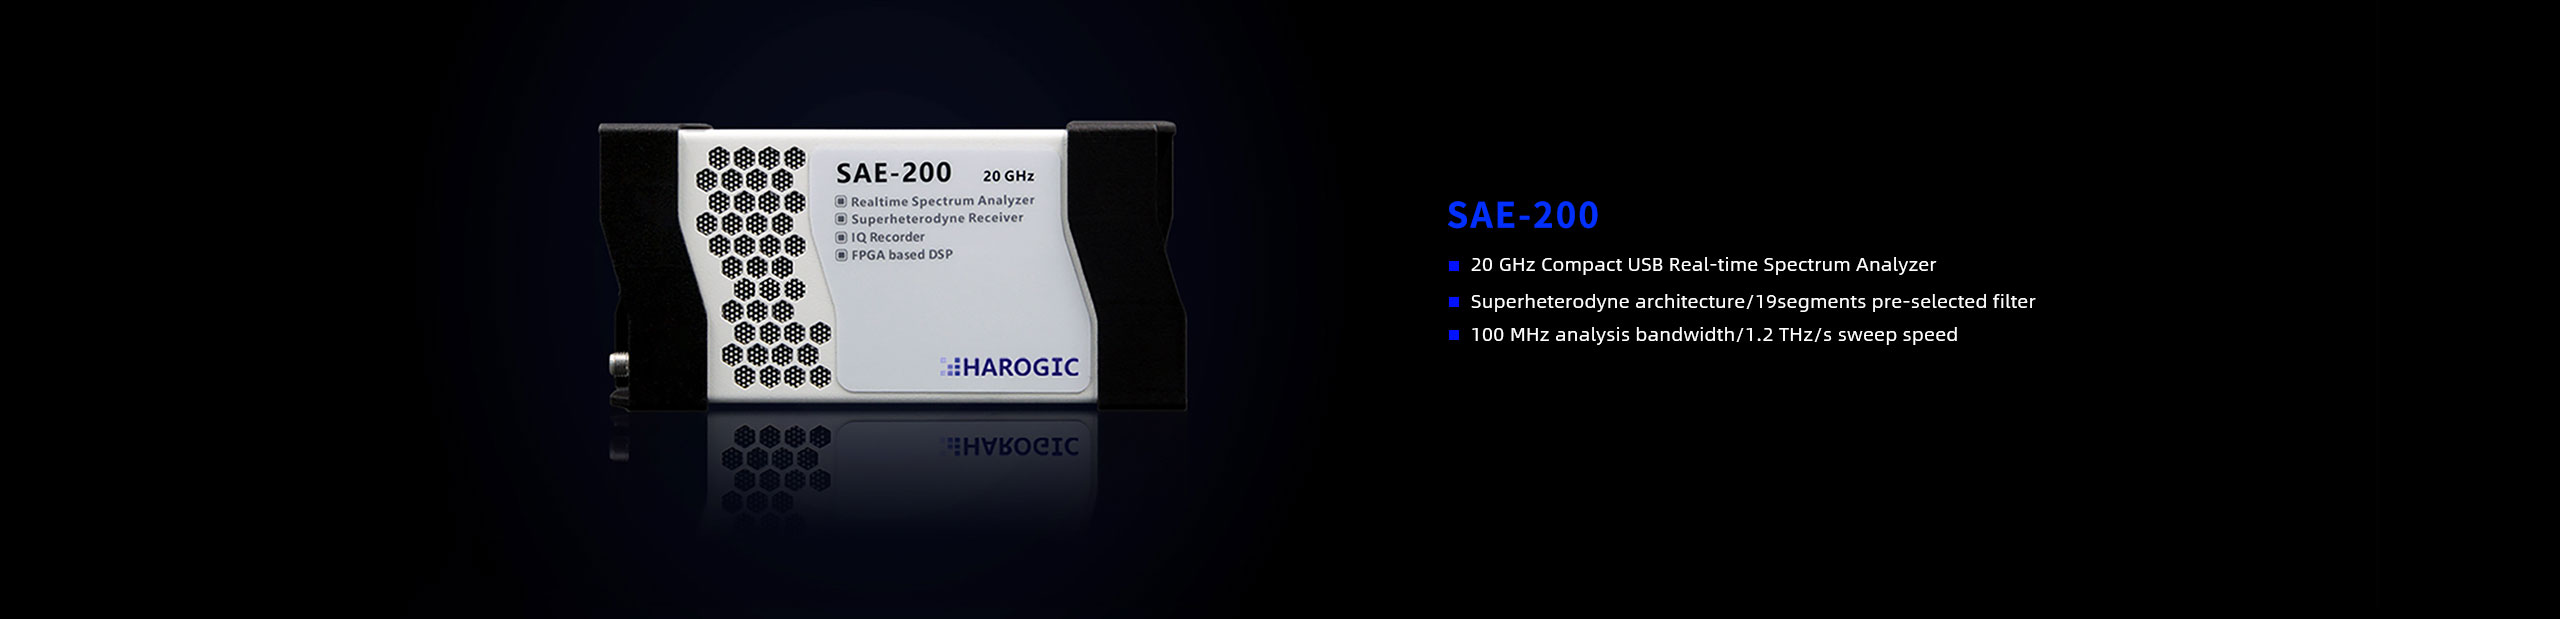 SAE-20020 GHz Compact Real-Time Spectrum Analyzer